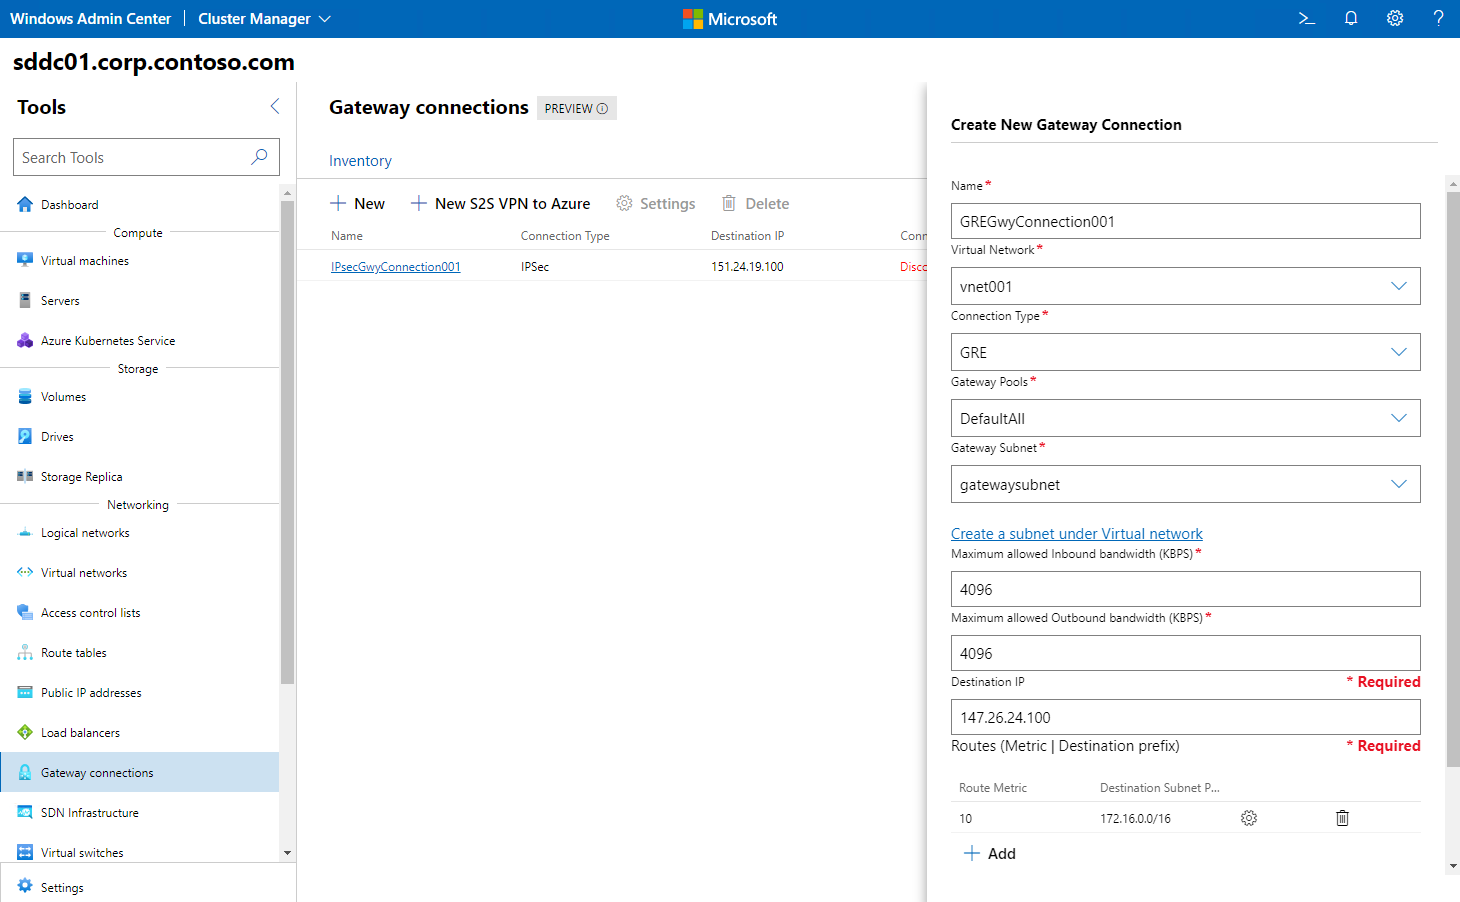 Screenshot of the Create New Gateway Connection pane in Windows Admin Center, depicting the creation of a new G R E gateway connection.